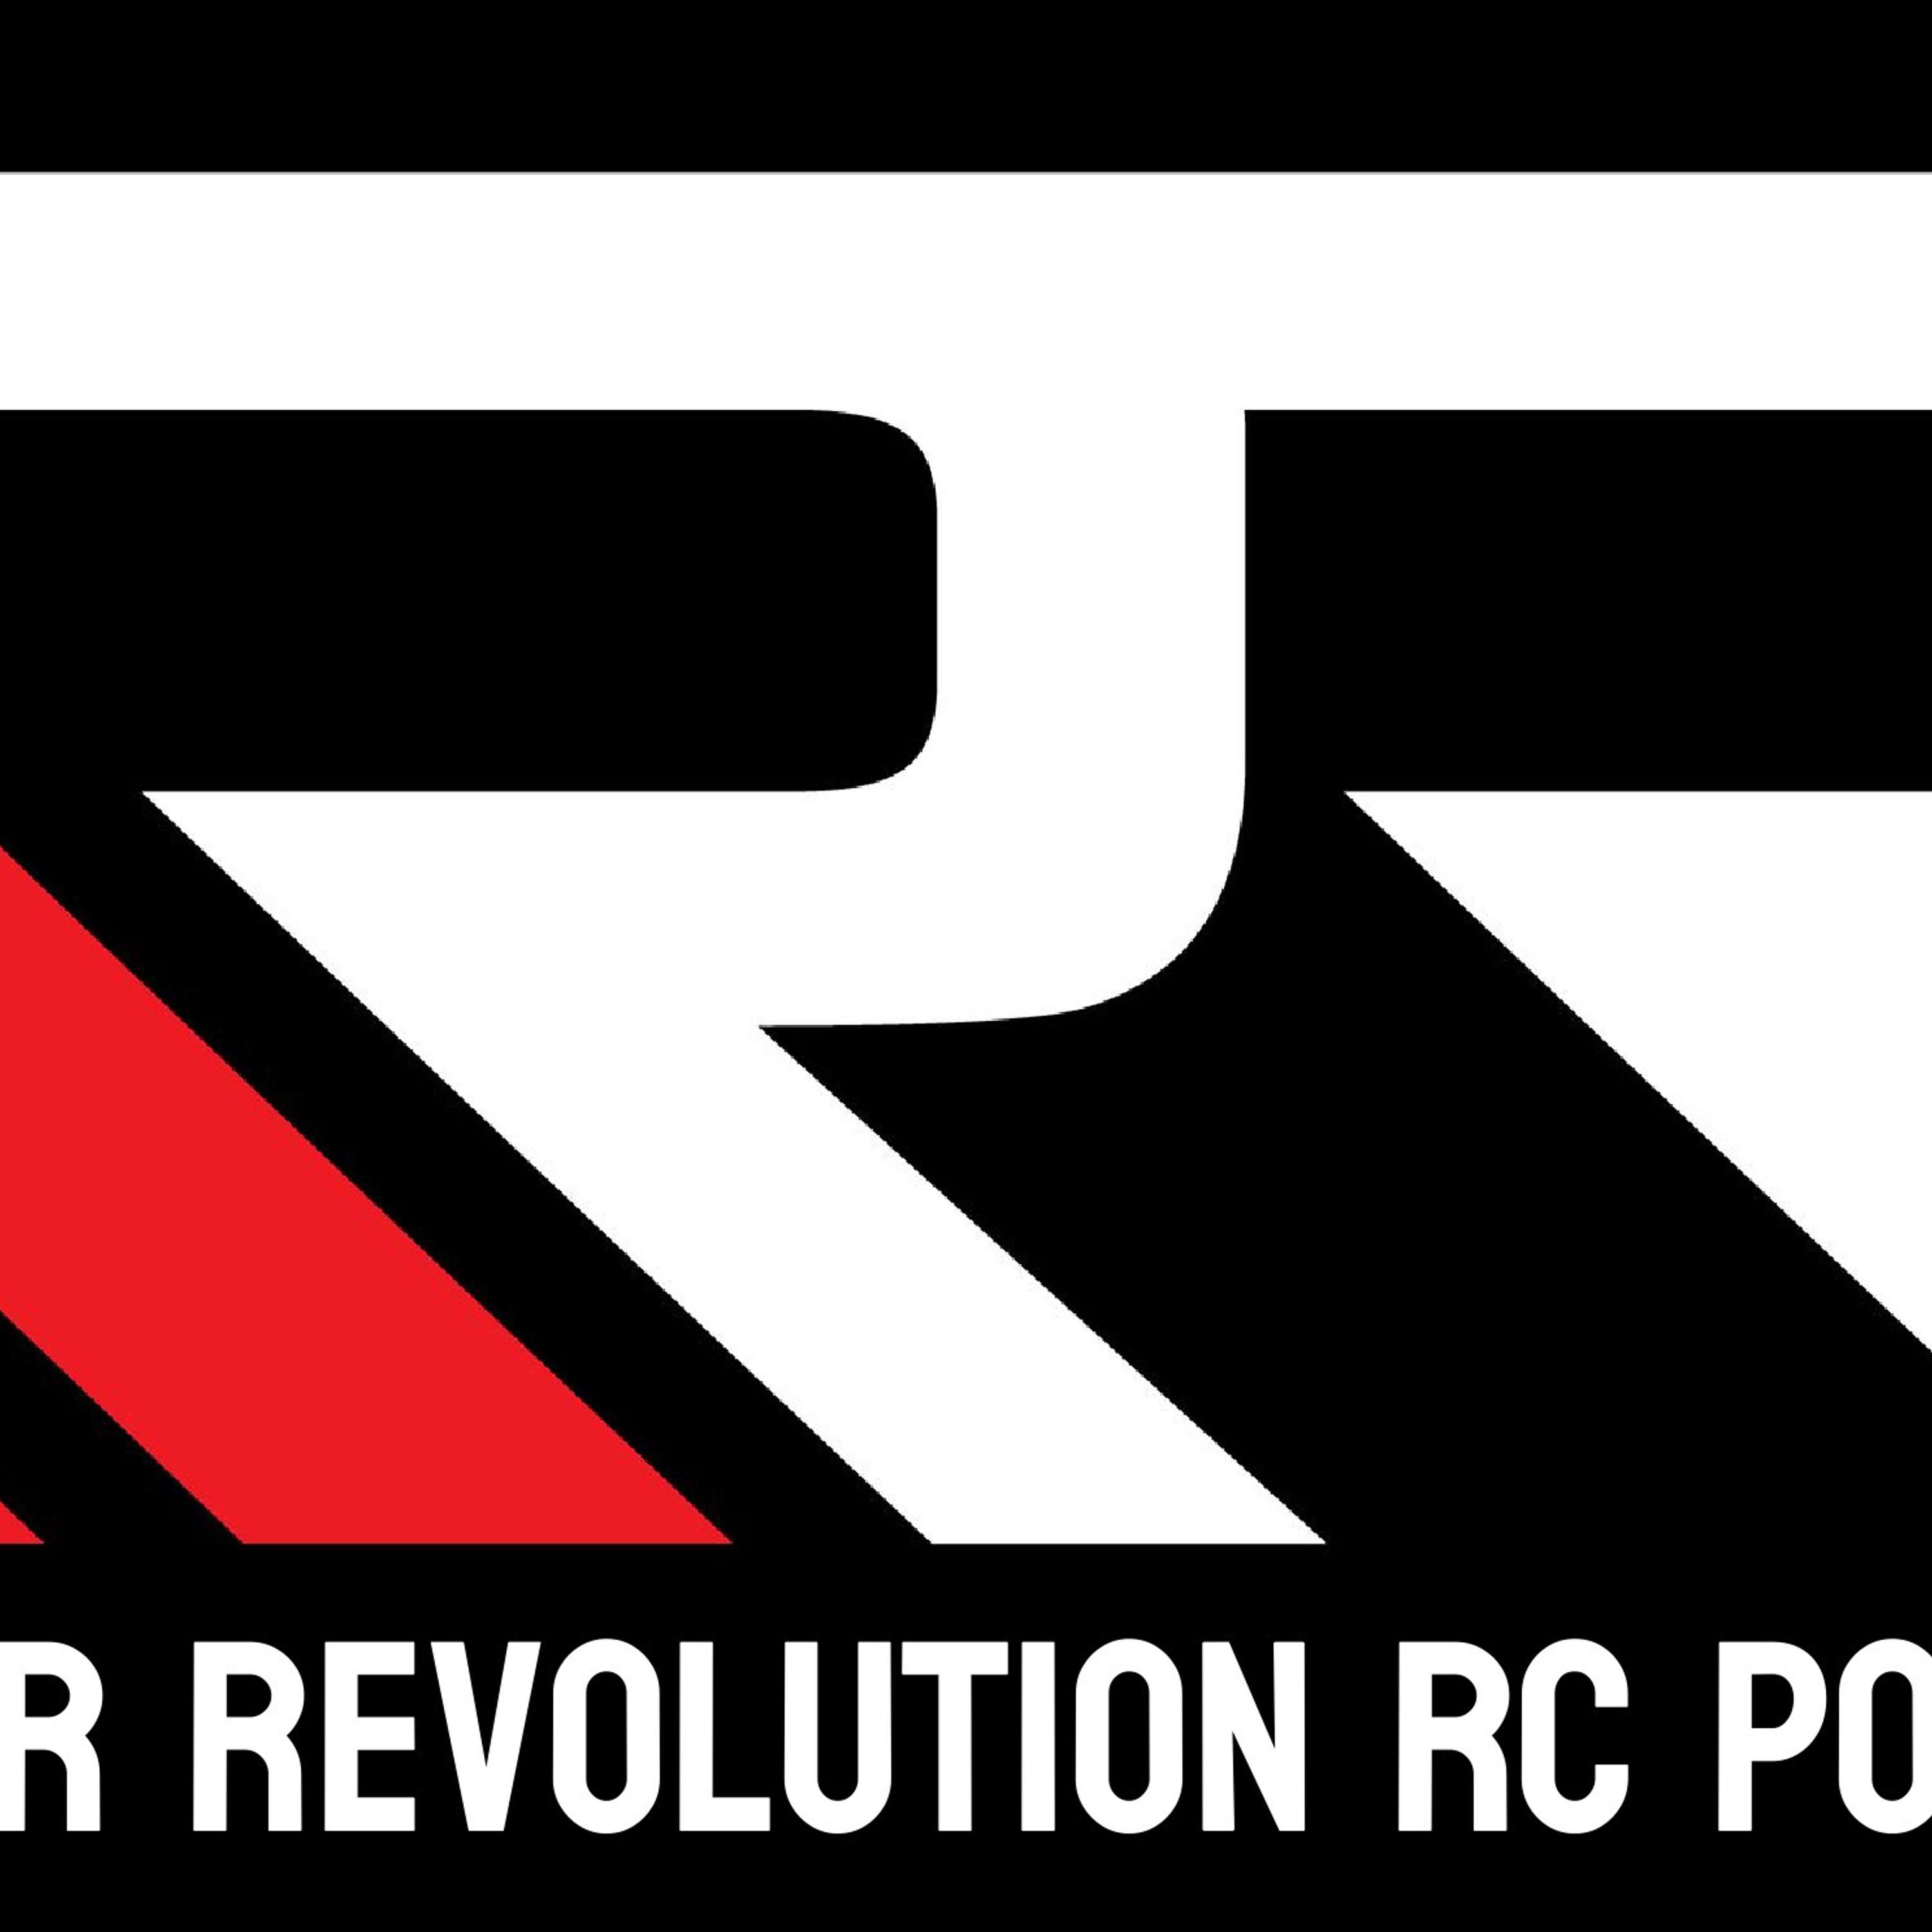 Rotor Revolution RC Podcast Ep. 2 - Meet the Crew